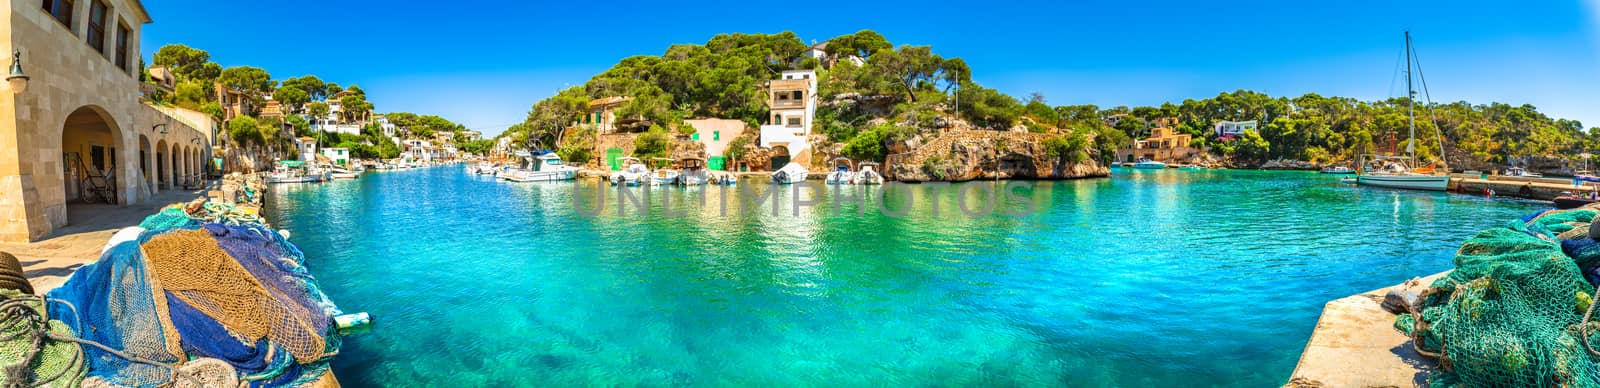 Panoramic view of old fisher village and boats at bay coast of Mallorca island